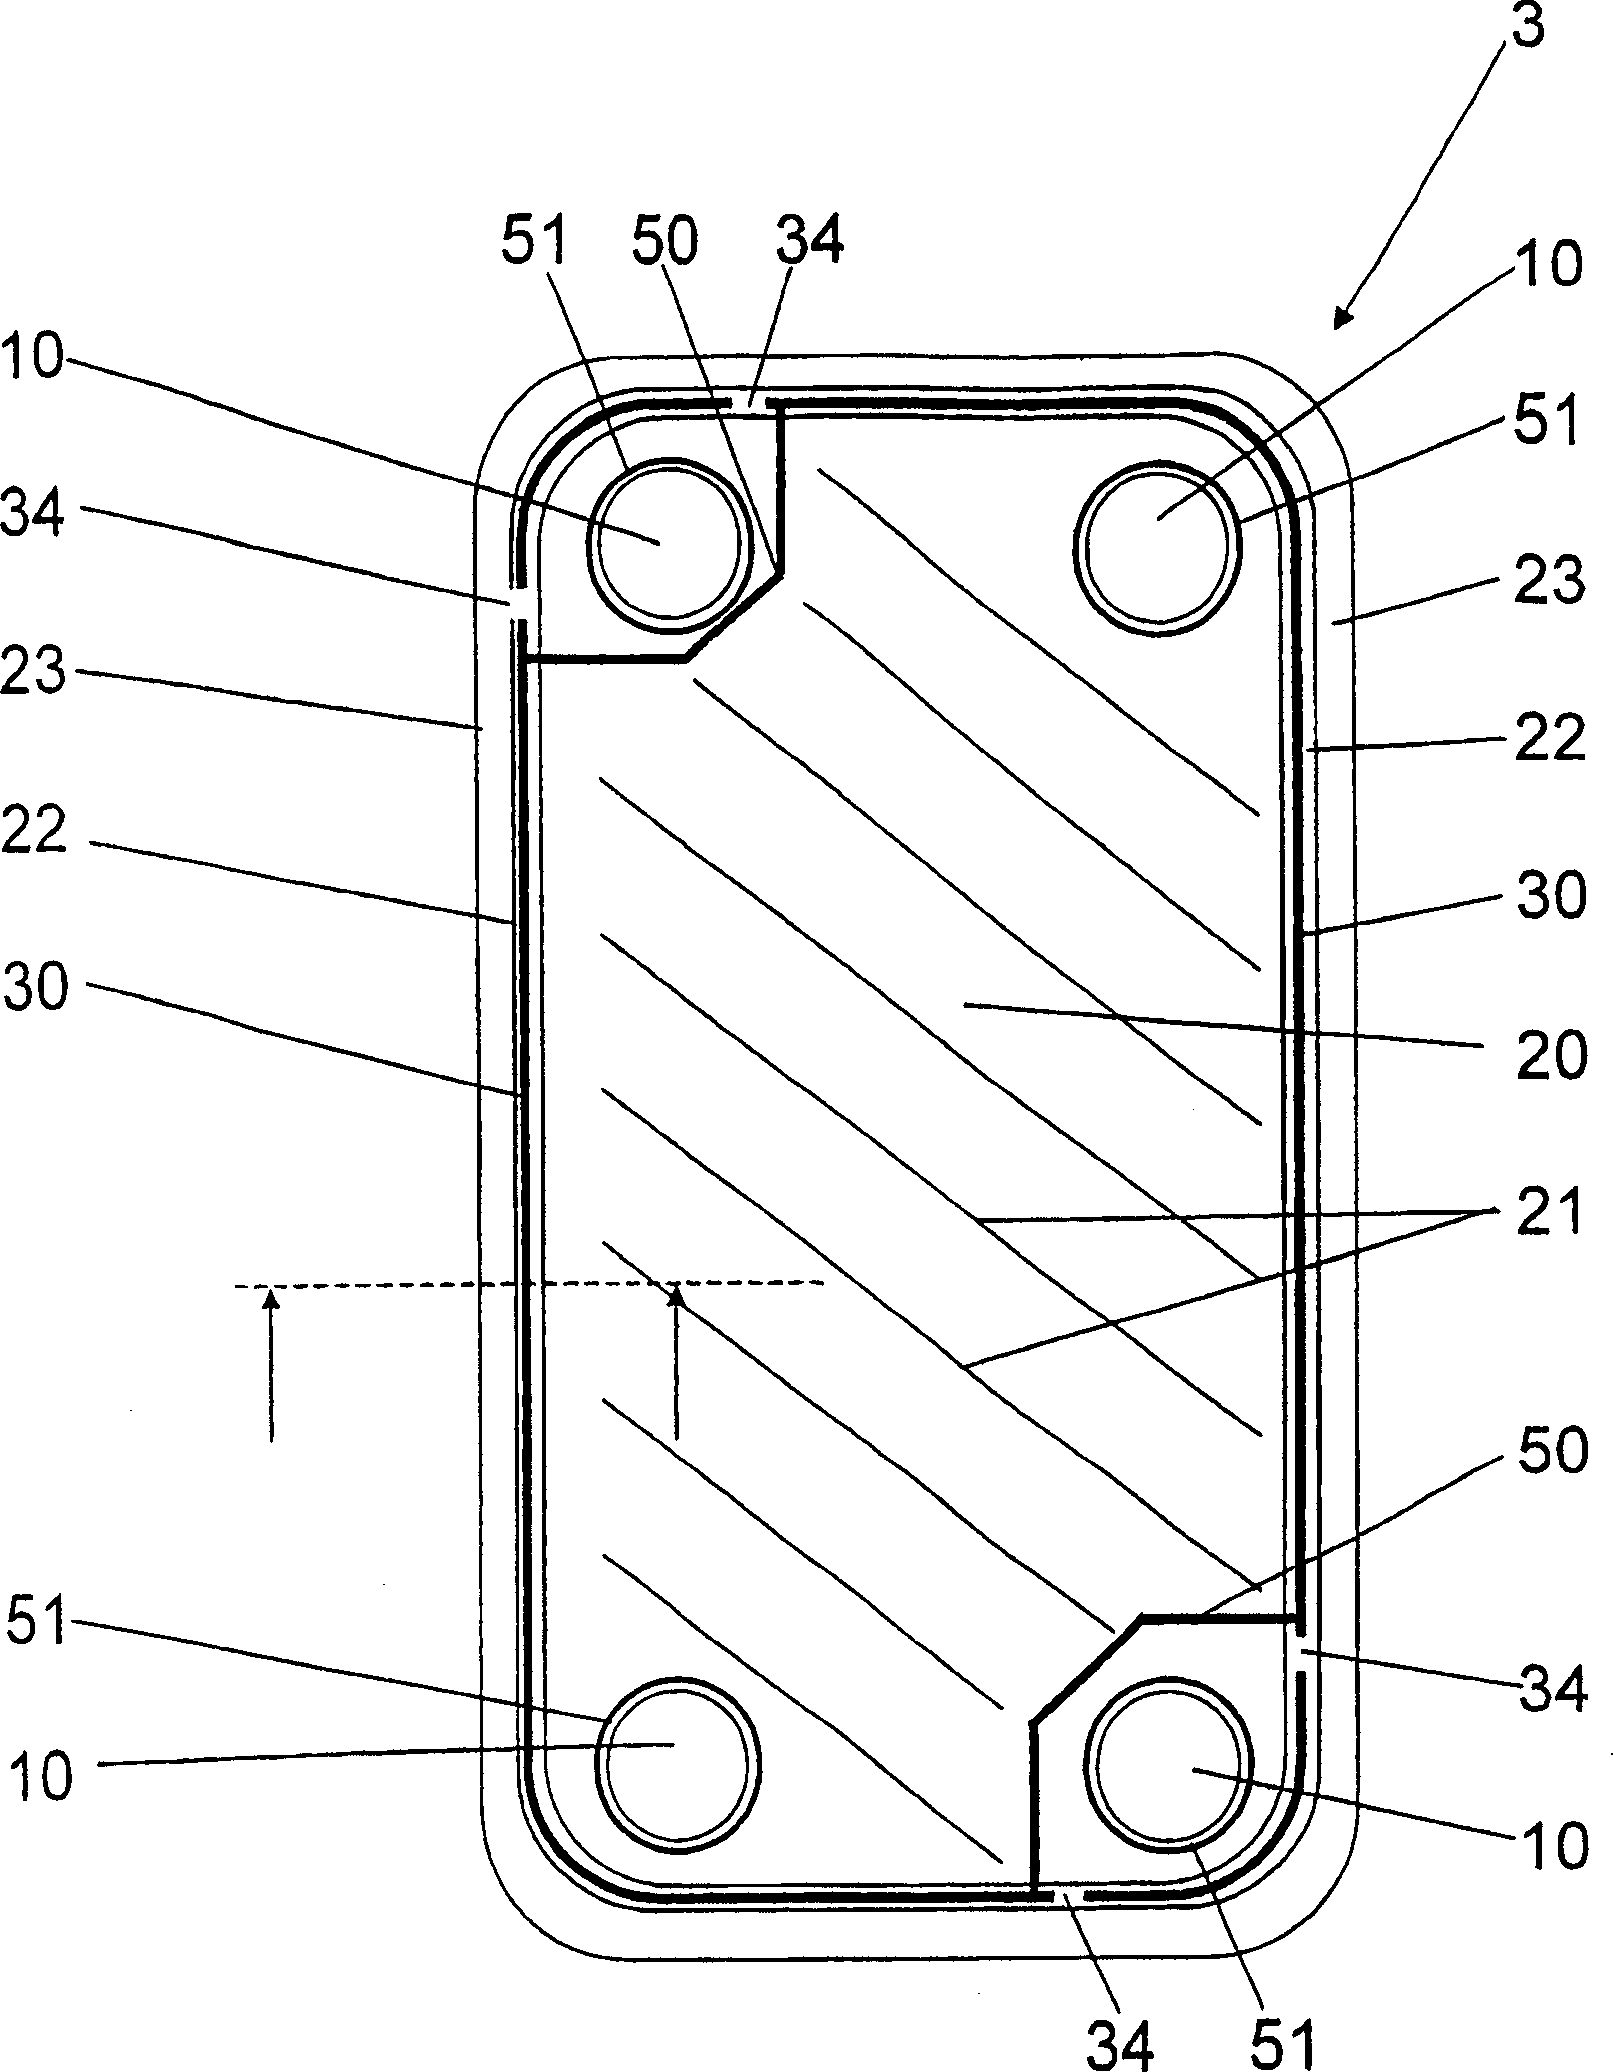 A heat exchanger plate, a plate heat exchanger and a method for manufacturing a heat exchanger plate